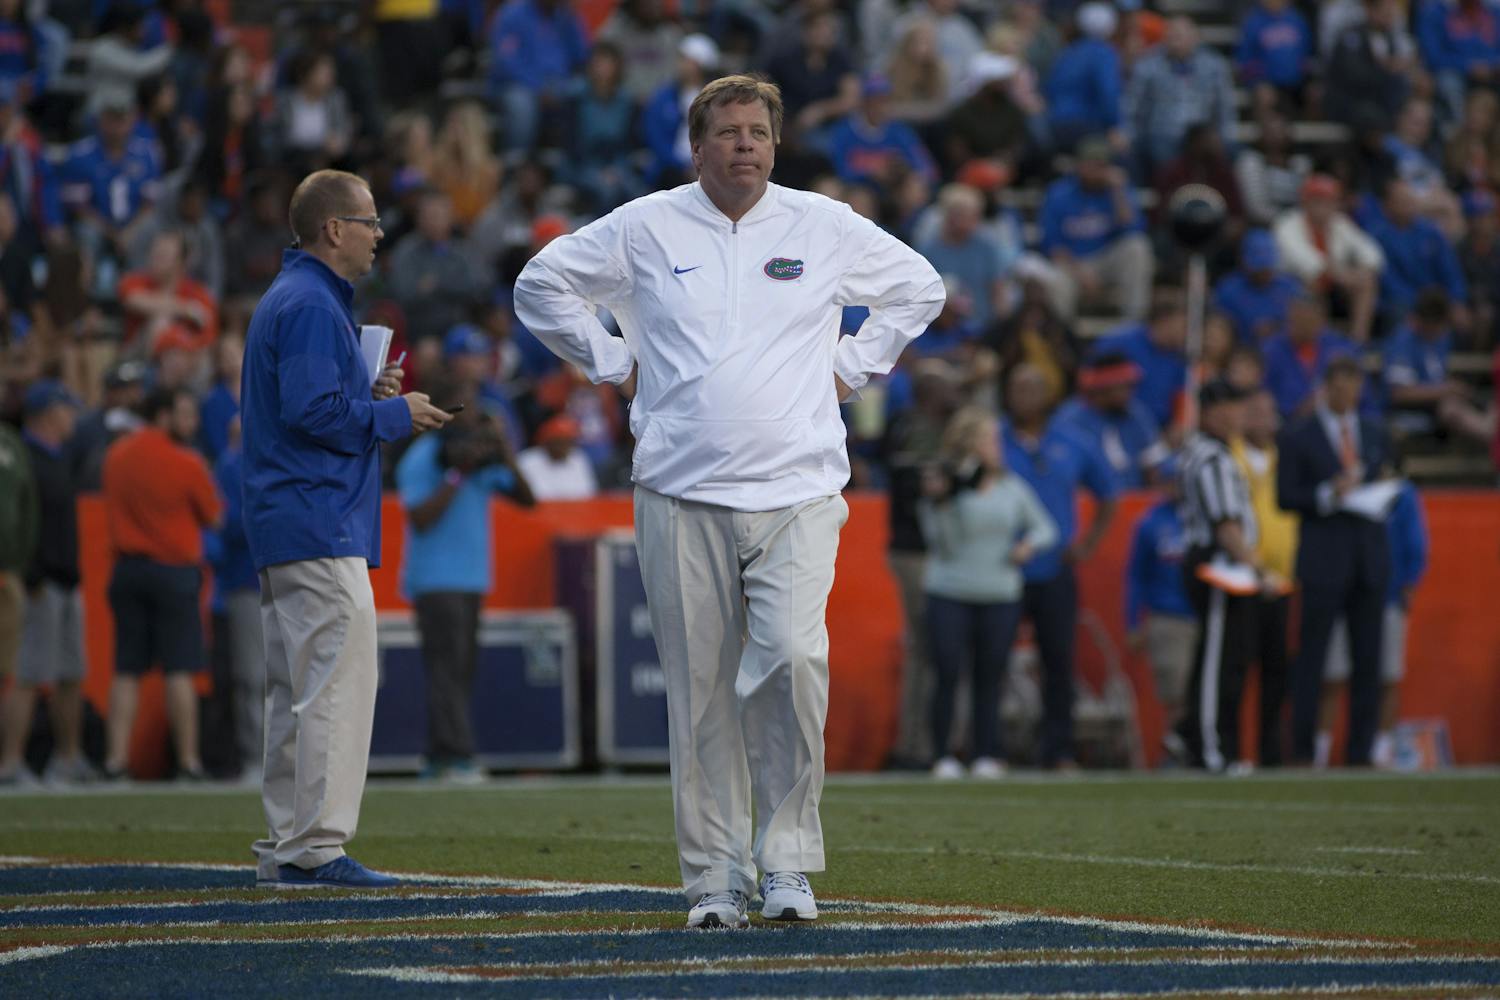 UF coach Jim McElwain watches on during UF's Orange and Blue Debut on April 7, 2017, at Ben Hill Griffin Stadium.